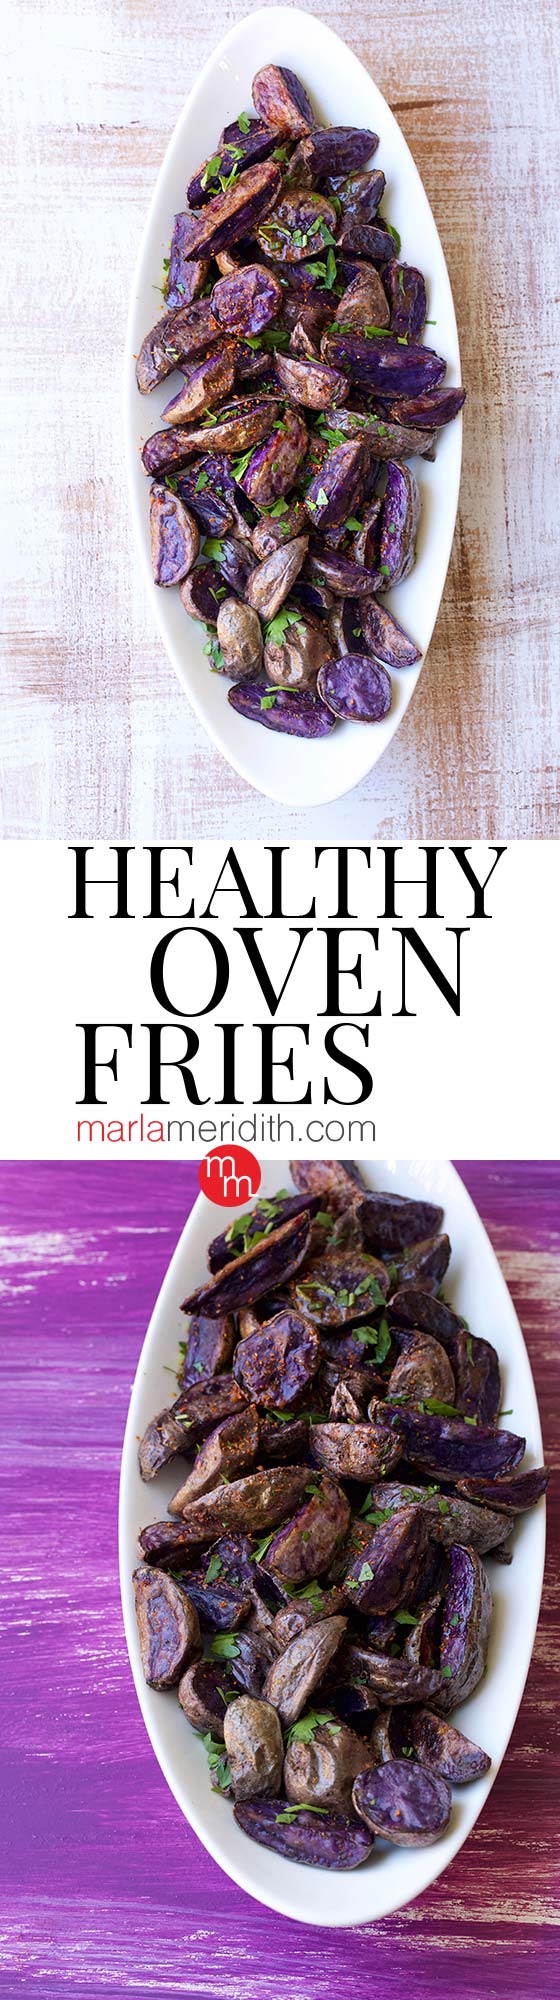 Healthy Oven Fries recipe, guilt free French Fries! MarlaMeridith.com